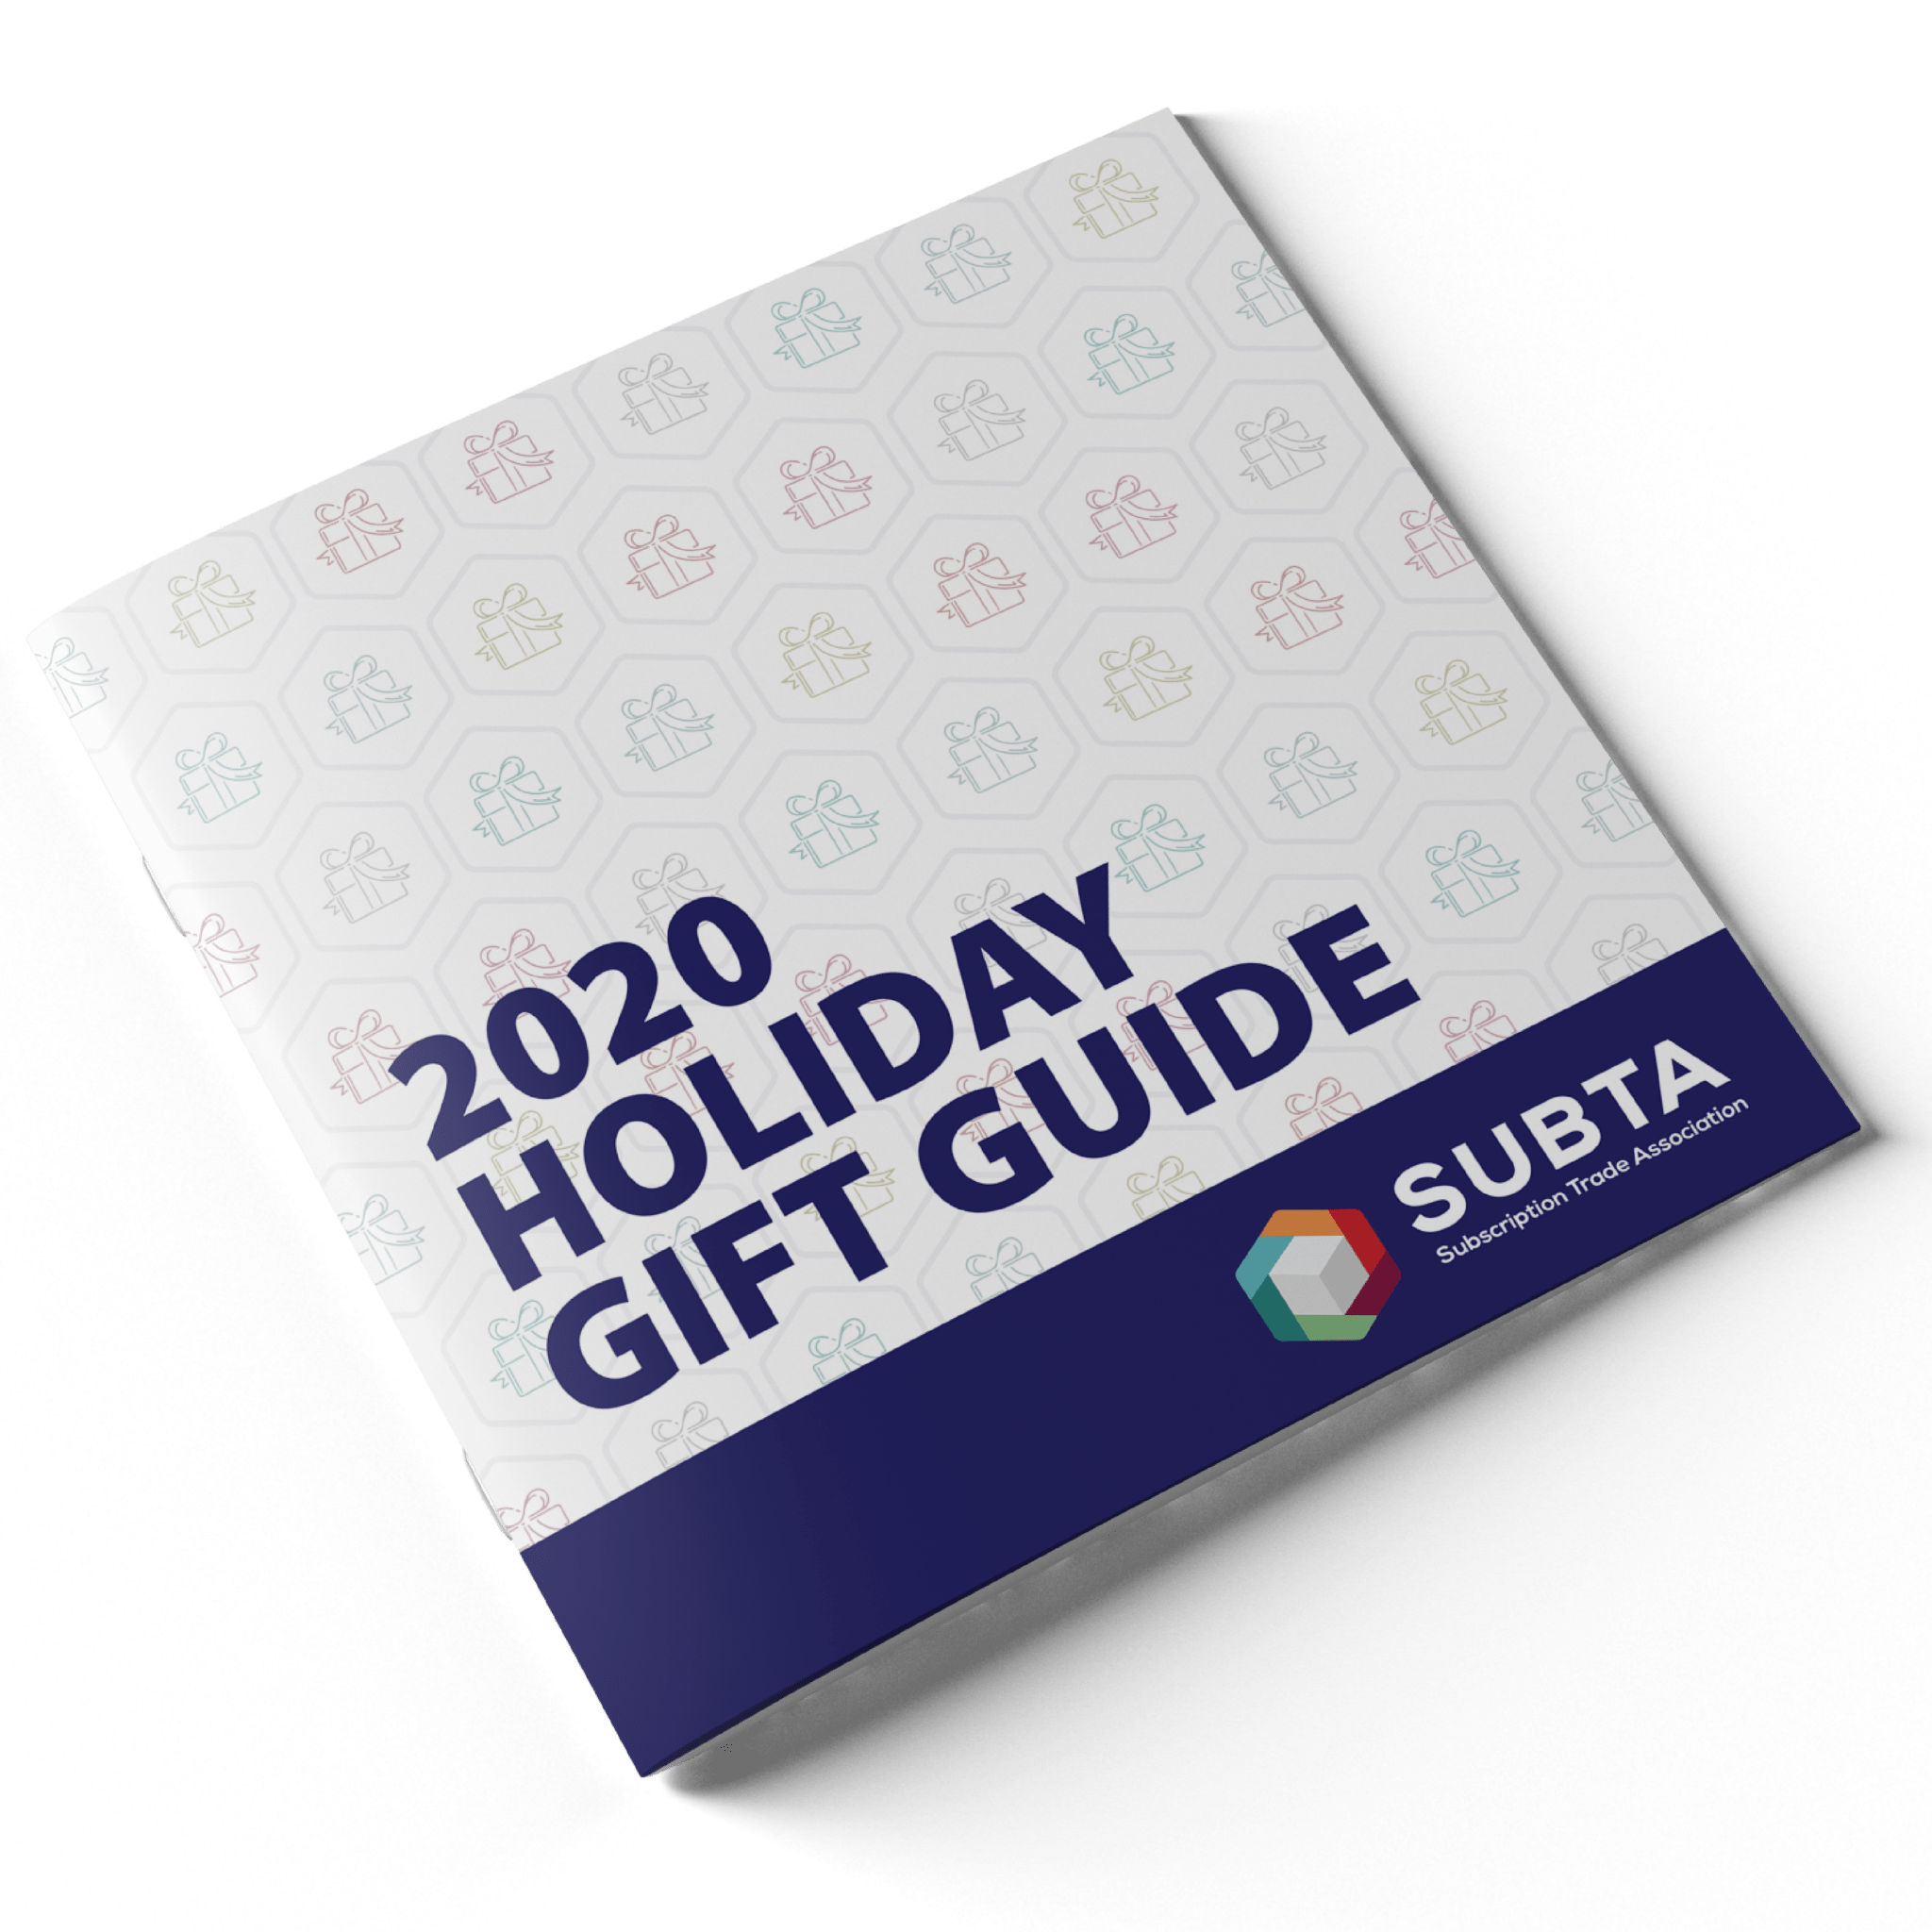 holiday gift guide 2020